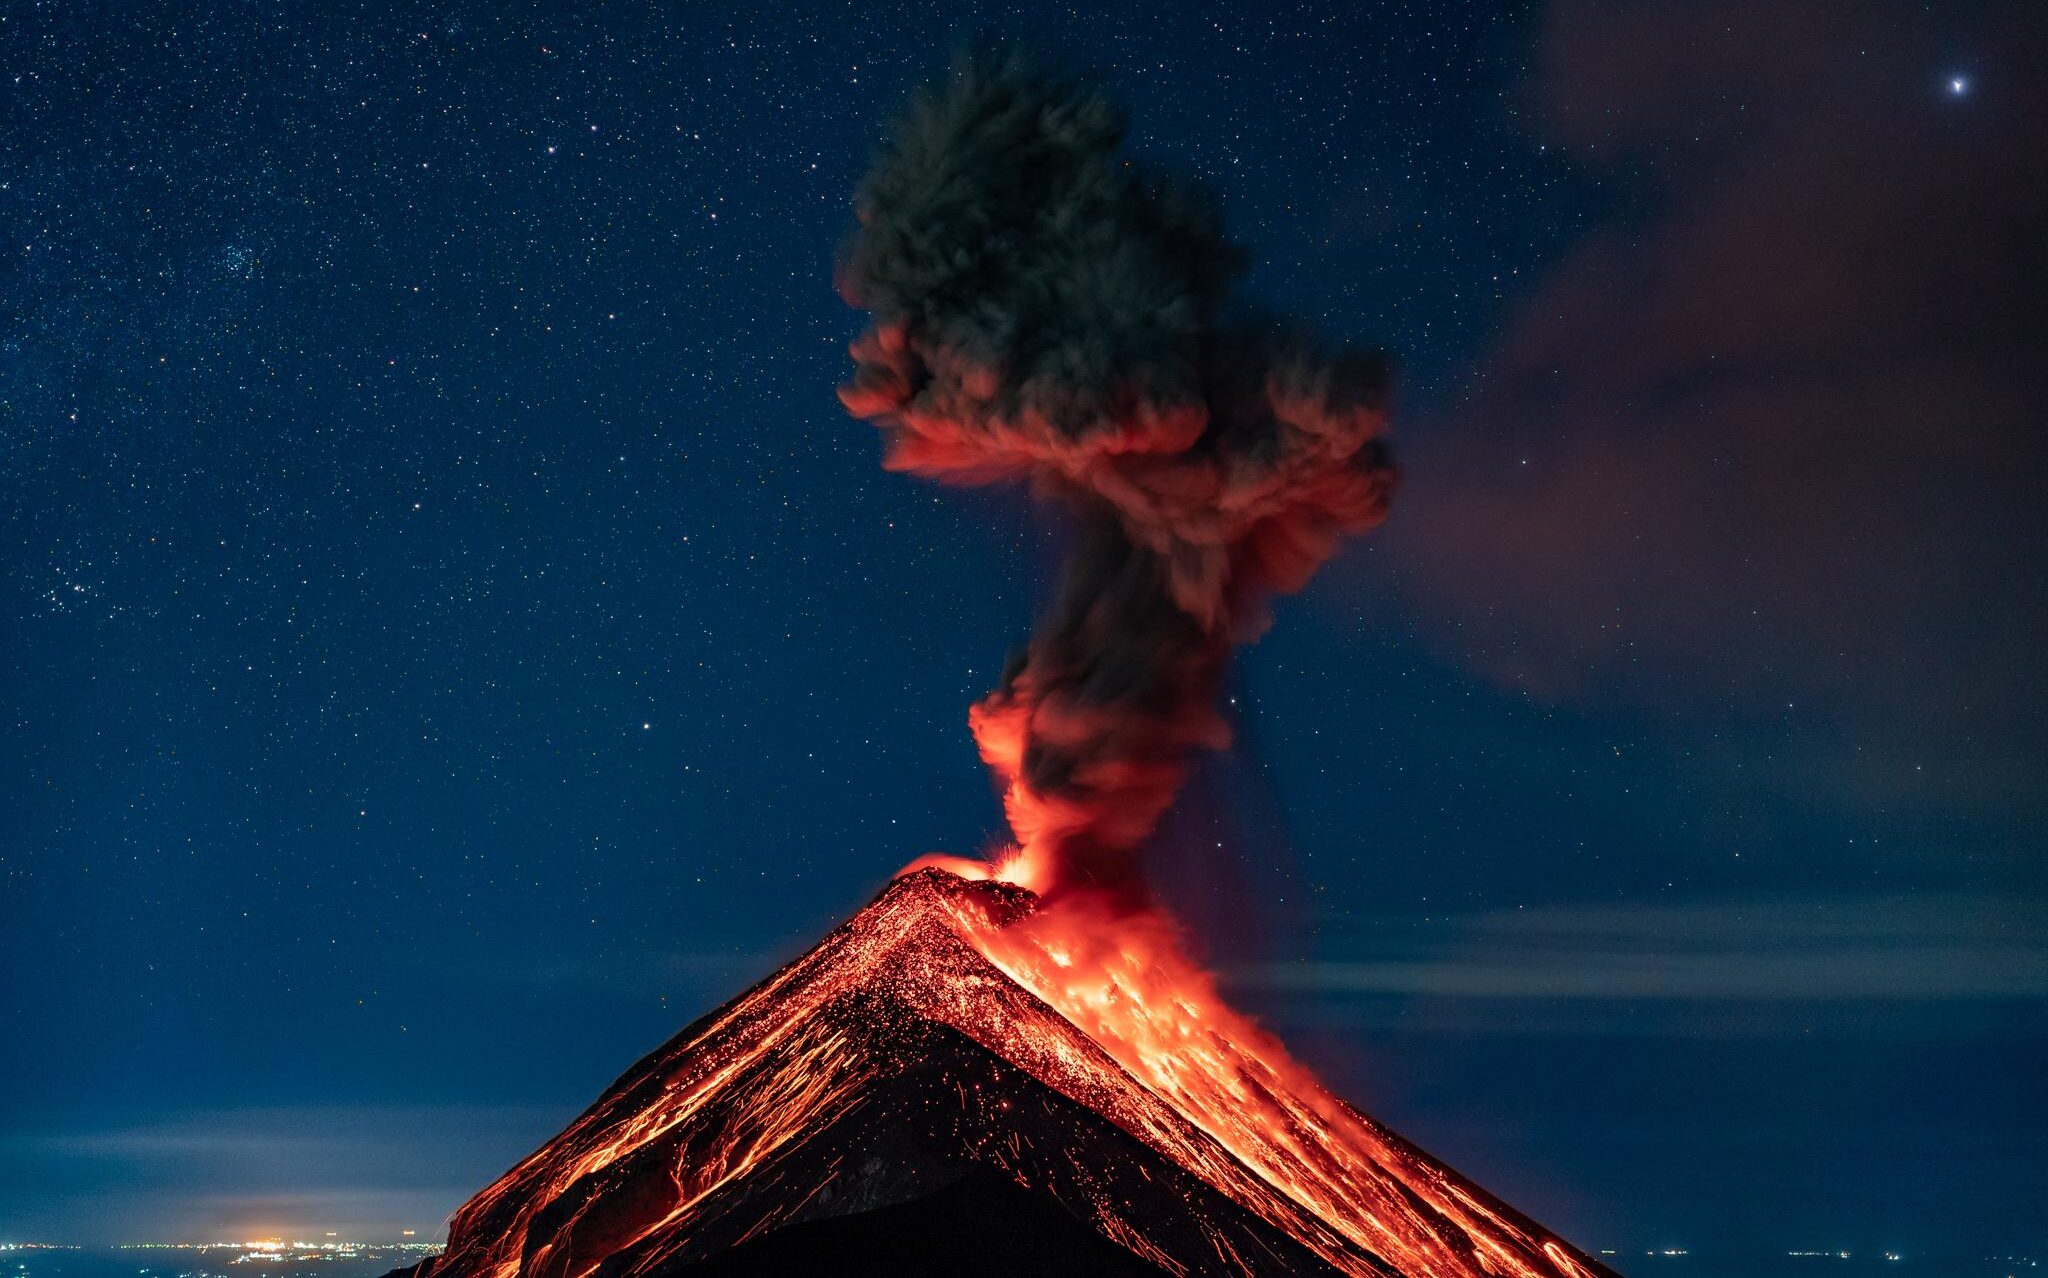 AAA! One-stop flights from Toronto (Hamilton) to Guatemala City (Fuego Volcano) for only 379 CAD round-trip including GST!